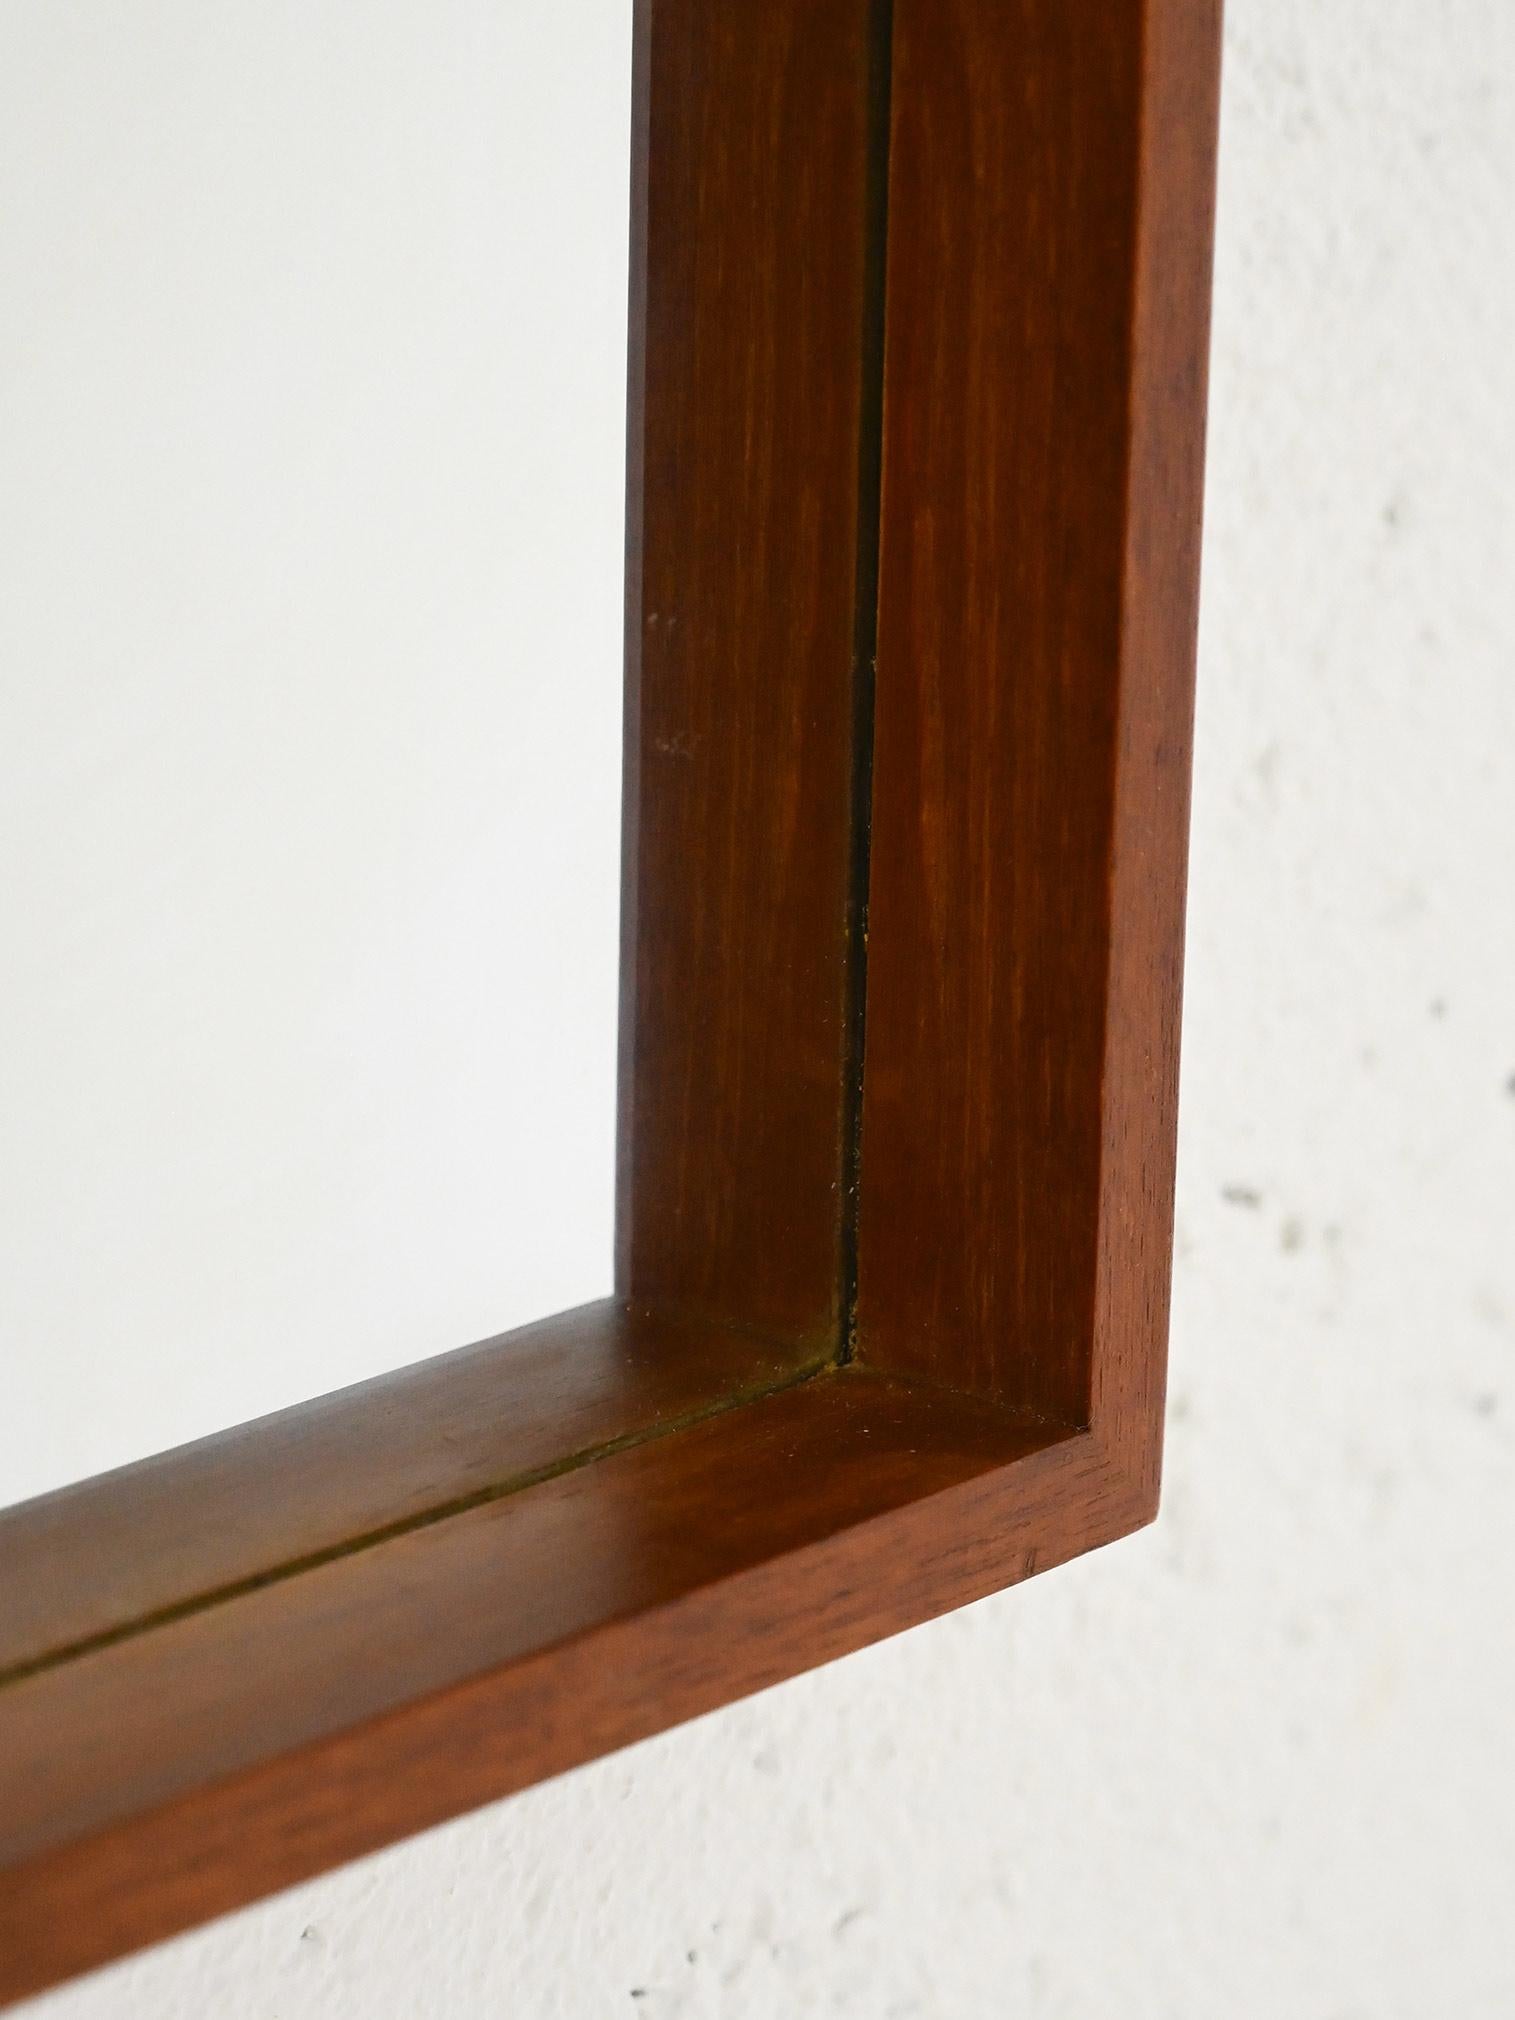 Original Scandinavian mirror from the 1960s.

A piece of furniture with understated lines and a retro feel, consisting of a rectangular teak wood frame.
Ideal for characterizing a wall with an original touch in perfect Nordic style. Try it in the